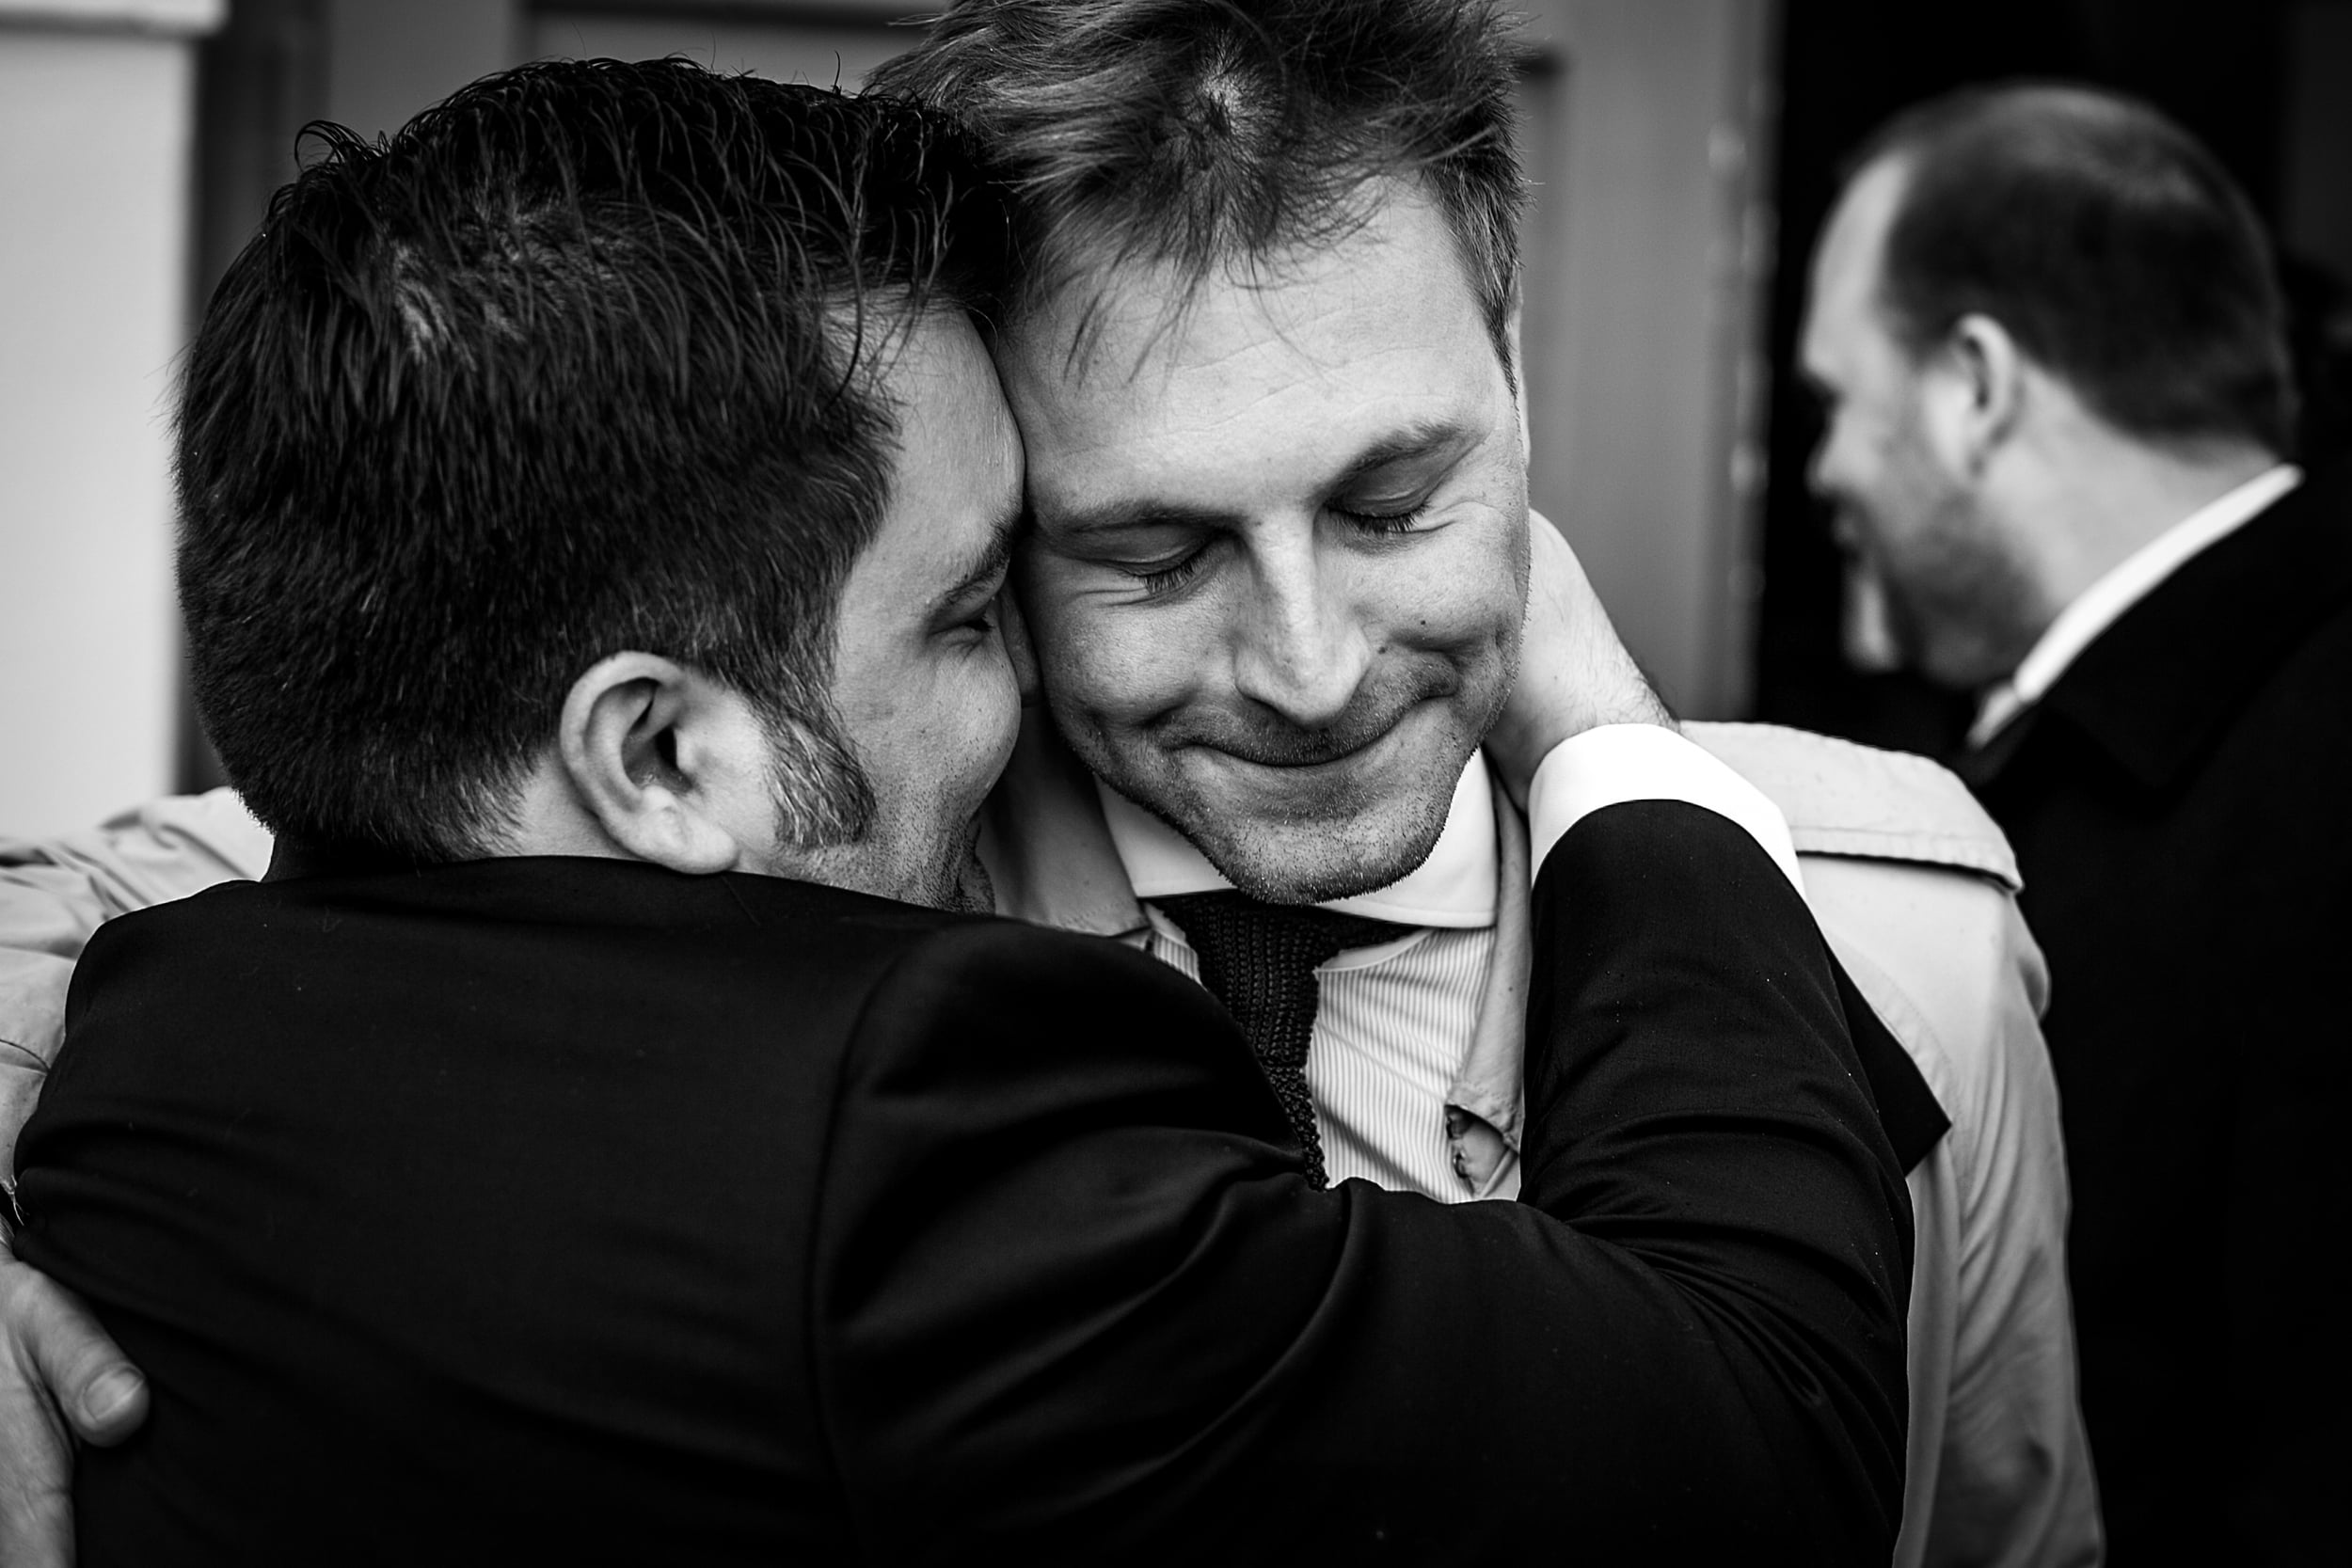 emotional moment between a groom and his friend (Copy)